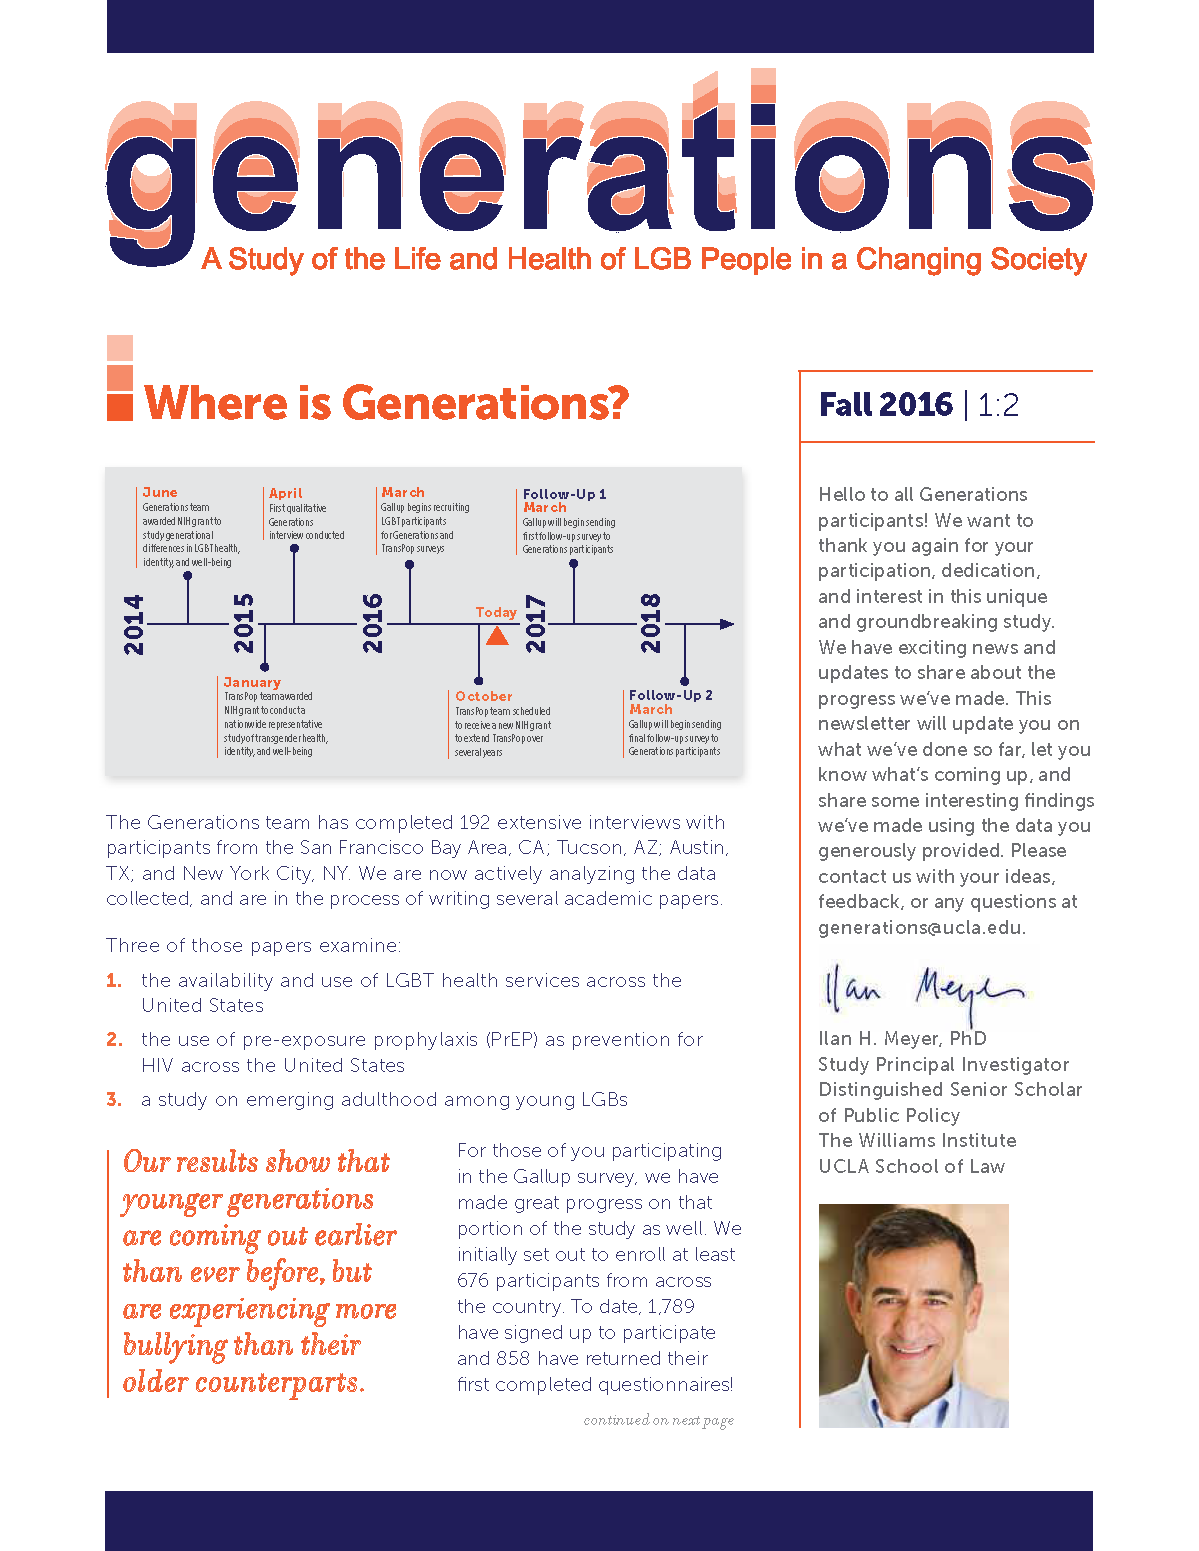 UCLAWI_GenerationsNewsletter_Fall2016_v7_FINAL_Page_1.png